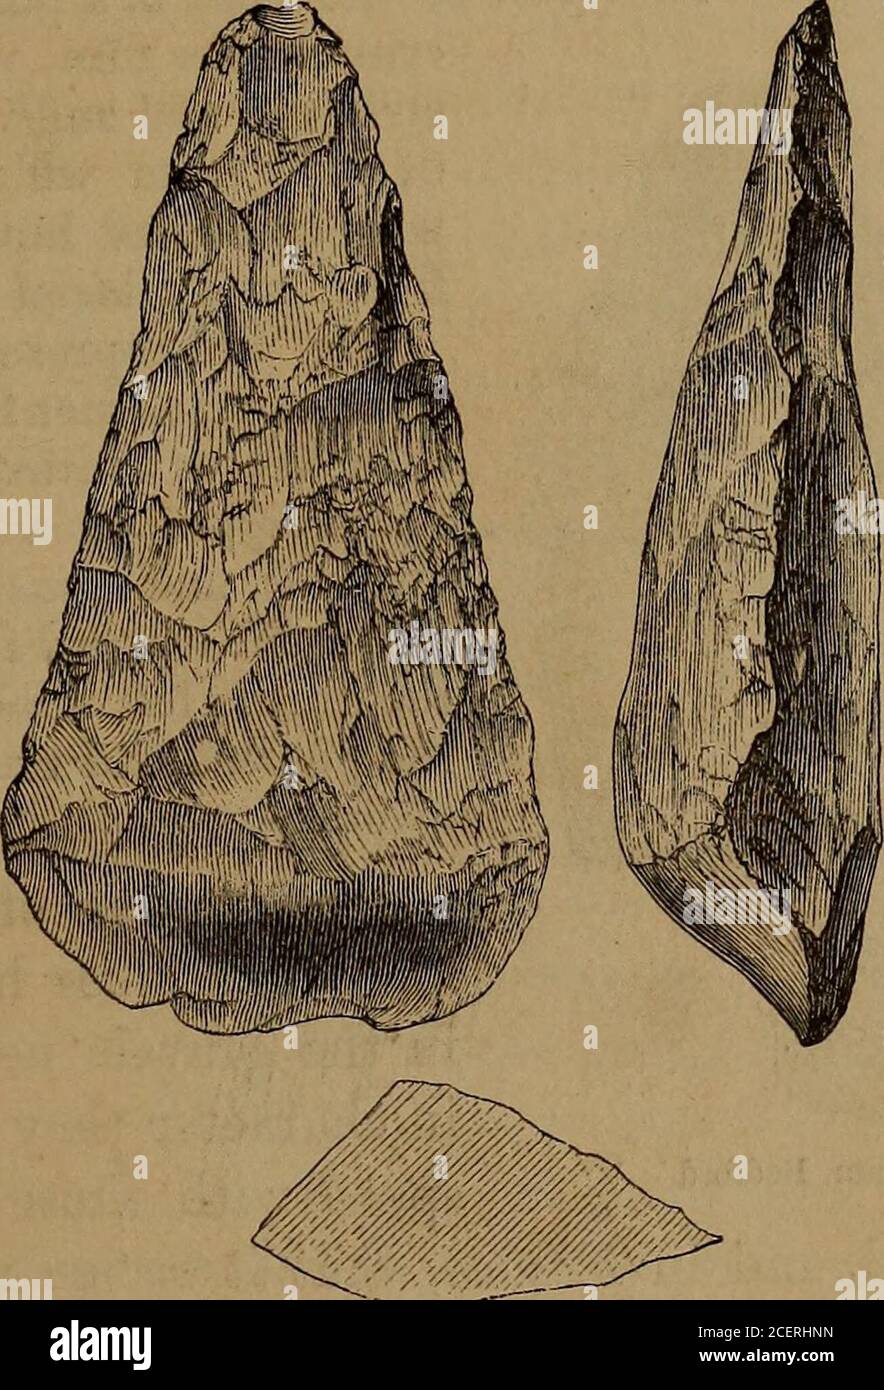 . The ancient stone implements, weapons, and ornaments, of Great Britain. Fig. 415.—Biddenham, Bedford. shows the natural crust of the flint at its truncated end, and is welladapted for being held in the hand when used. Other specimens from the Biddenham Pit are engraved on the scale ofone-half linear measure in Figs. 416 to 418. The whole, with the exception of Fig. 417, are in the collection ofMr. Wyatt. I1-- ll(&gt; is of ochieows cherty flint, symmetrically chipped, andBhowing a portion of the original crust of the flint at the base. Itsangles are sharp, and not water-worn. In character it Stock Photo